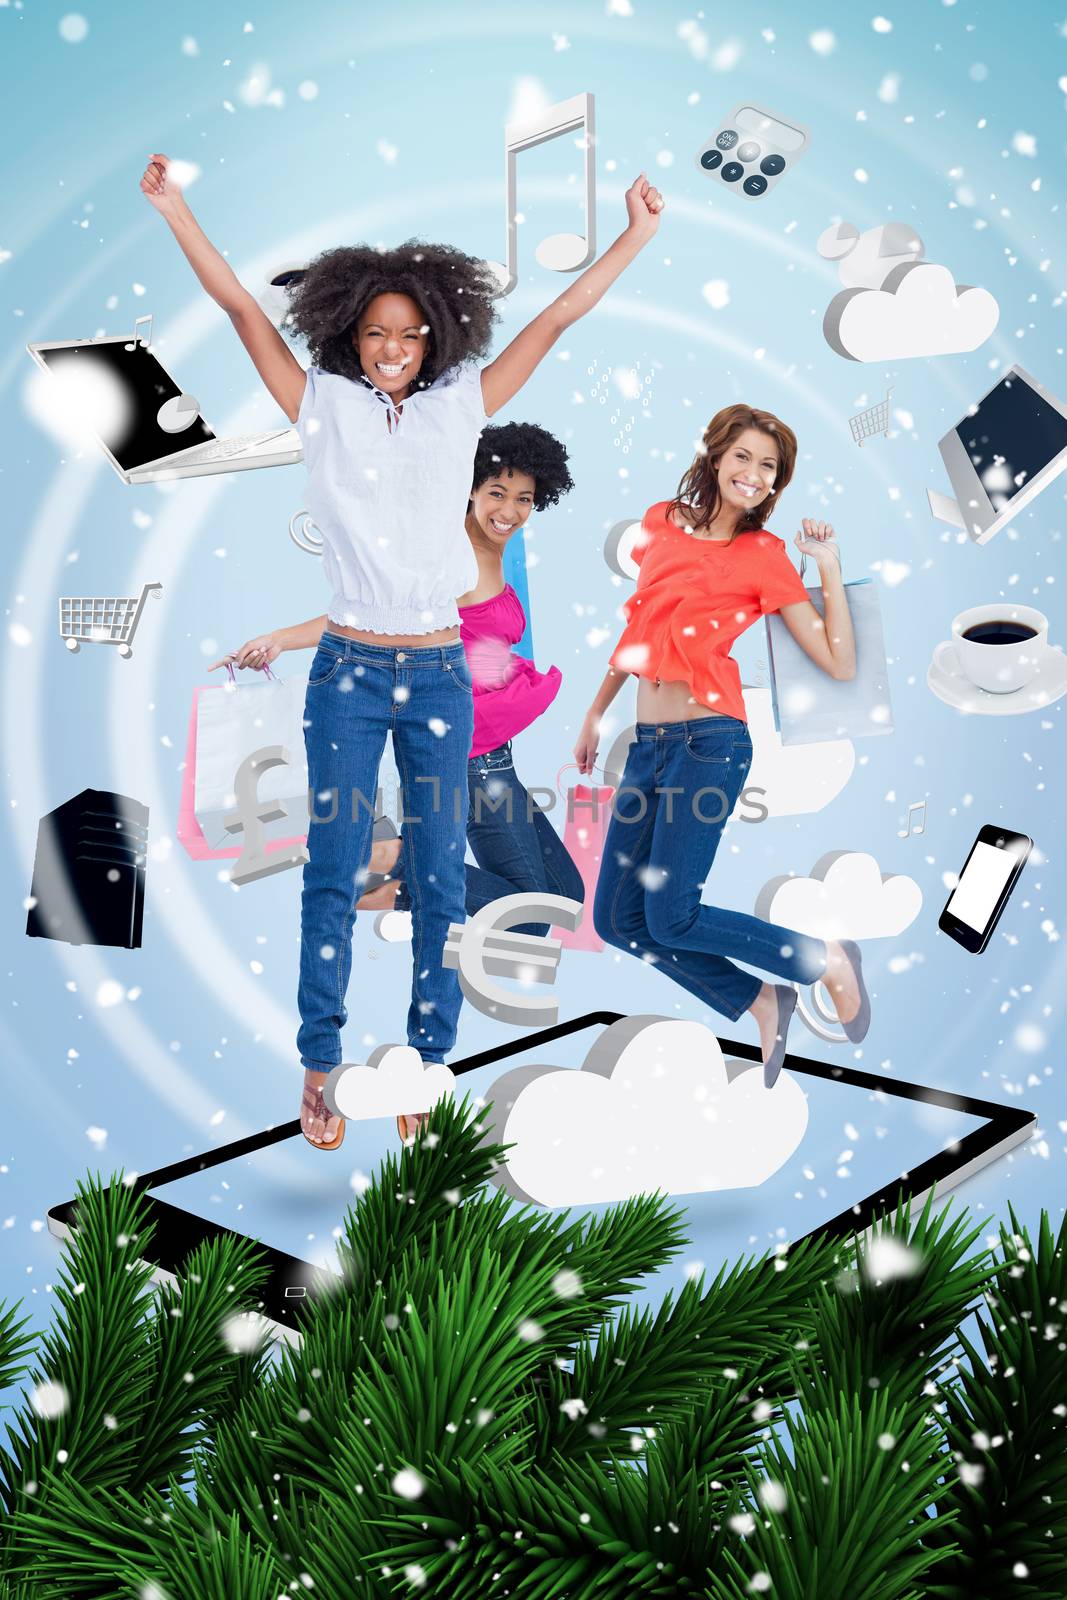 Composite image of a Three cute women jumping on a tablet pc against snow falling